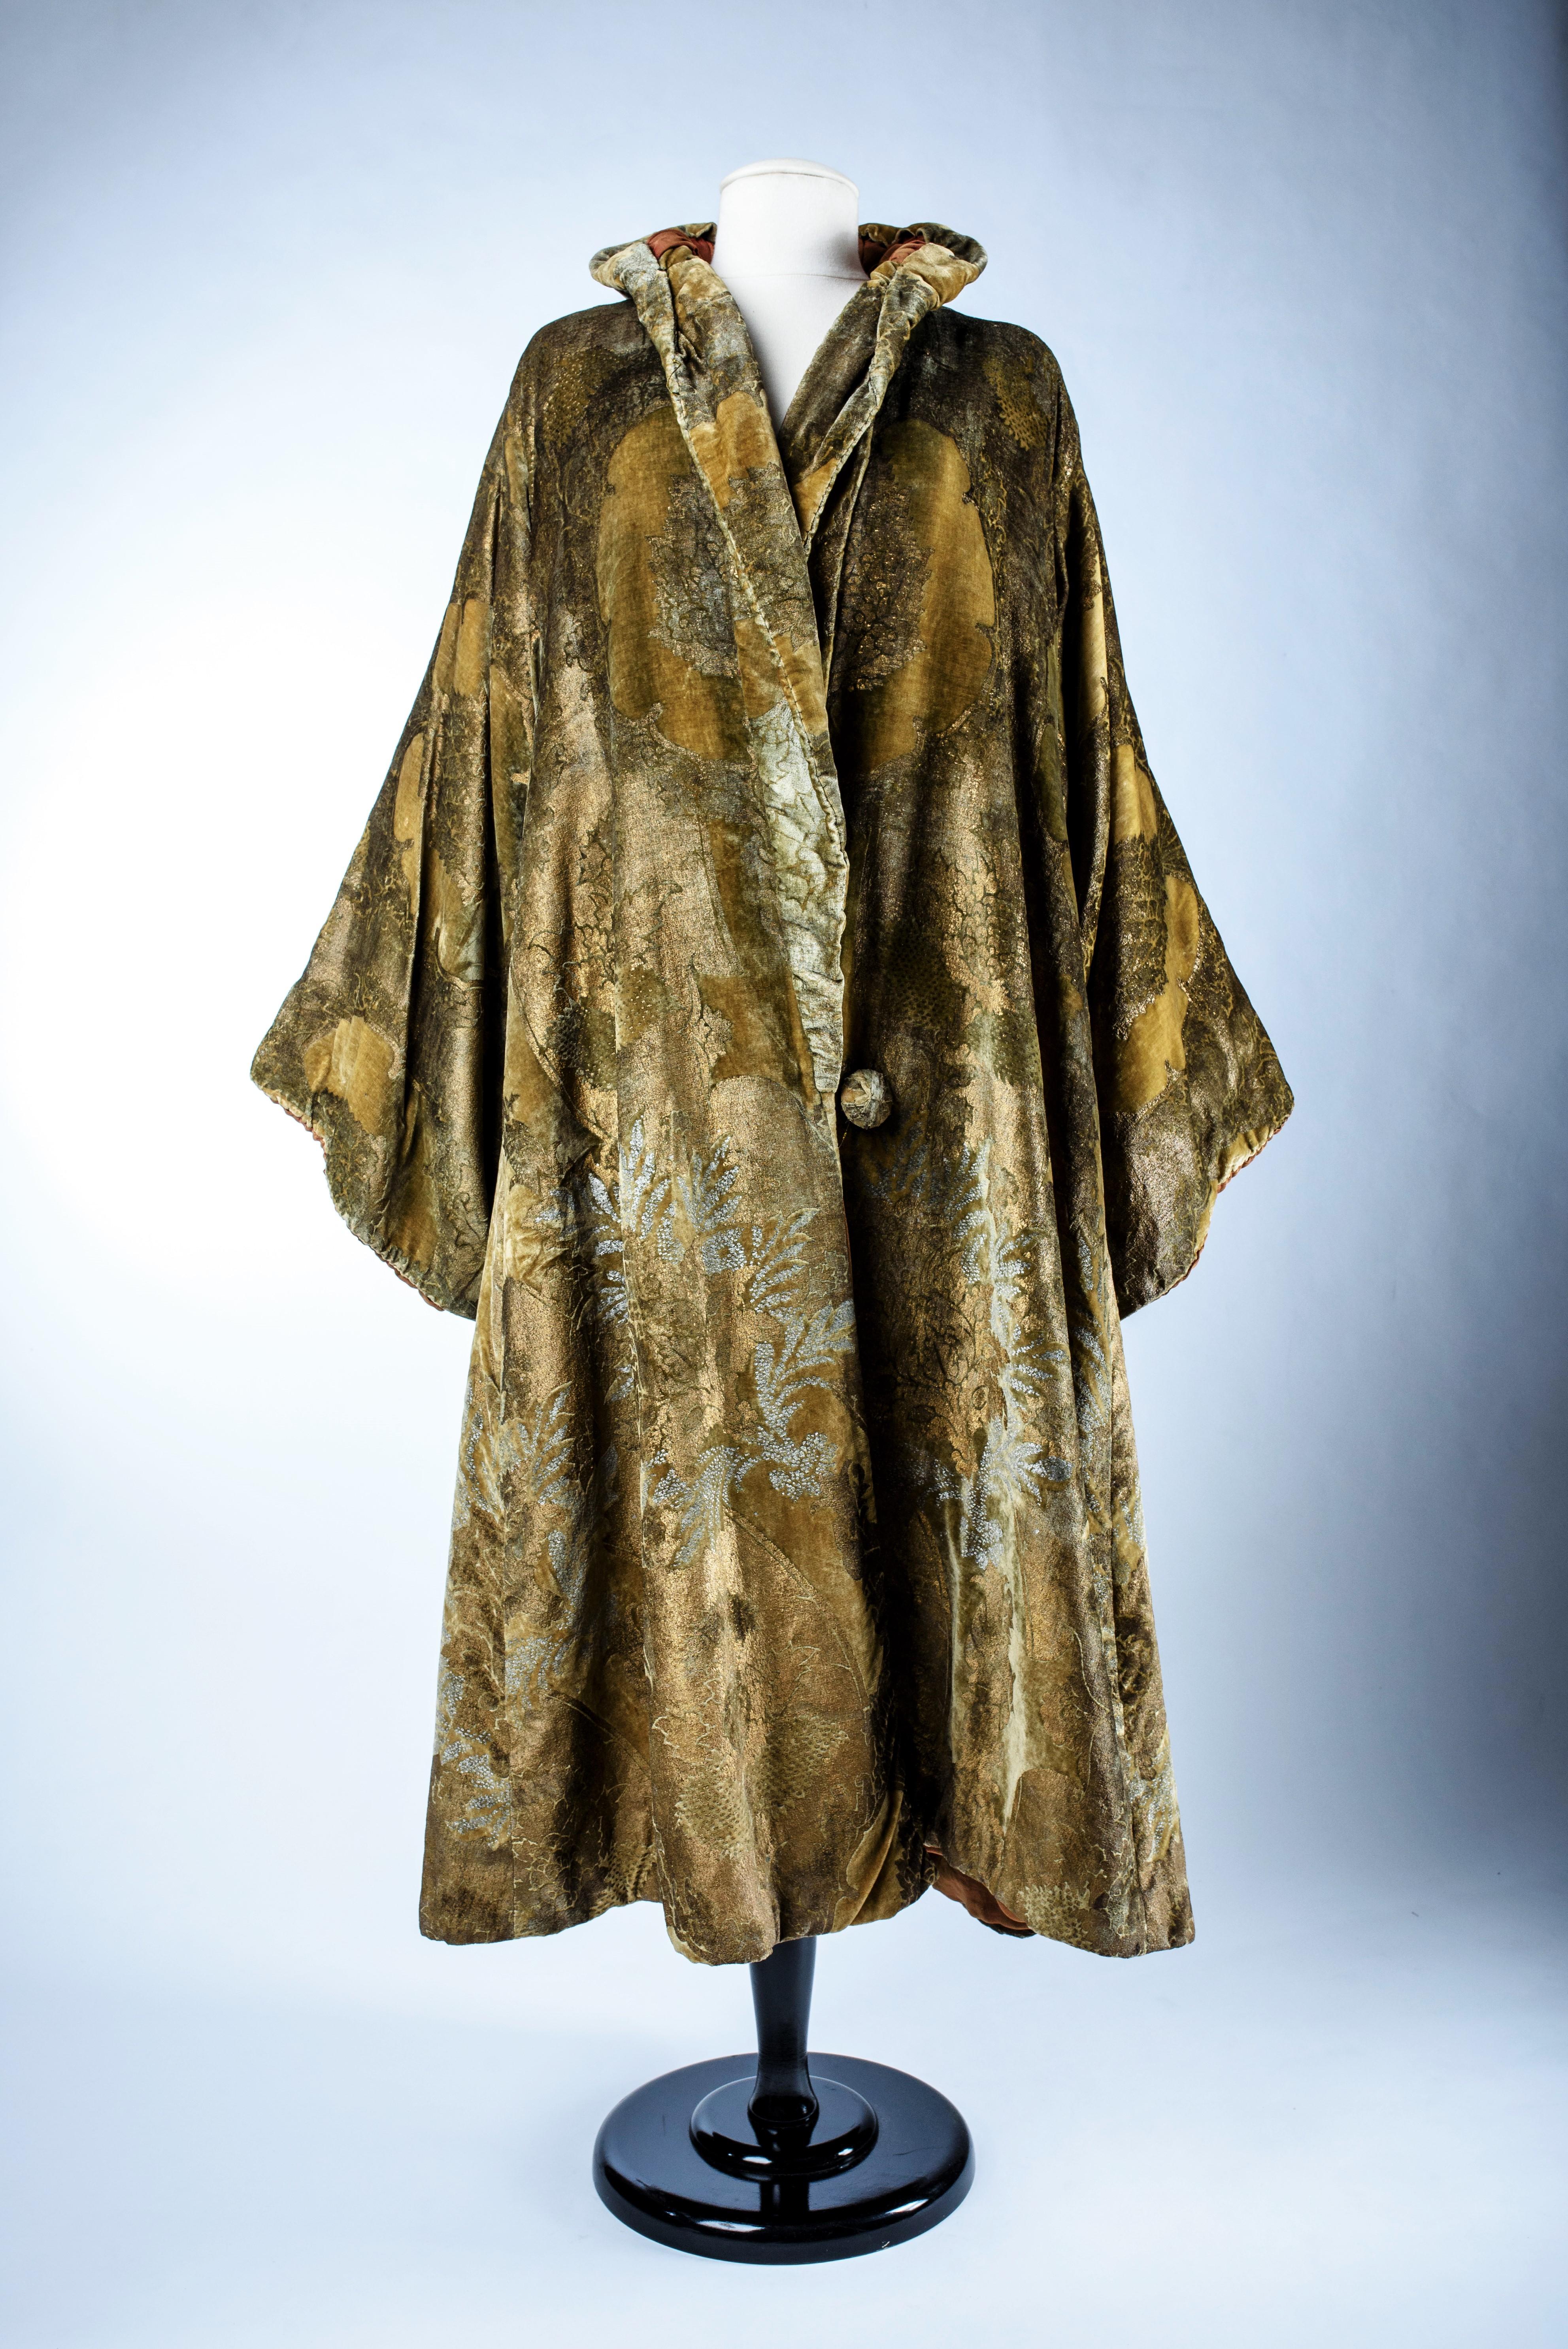 A Mariano Fortuny Gold and Silver Printed Velvet Evening Coat -Venice Circa 1925 12